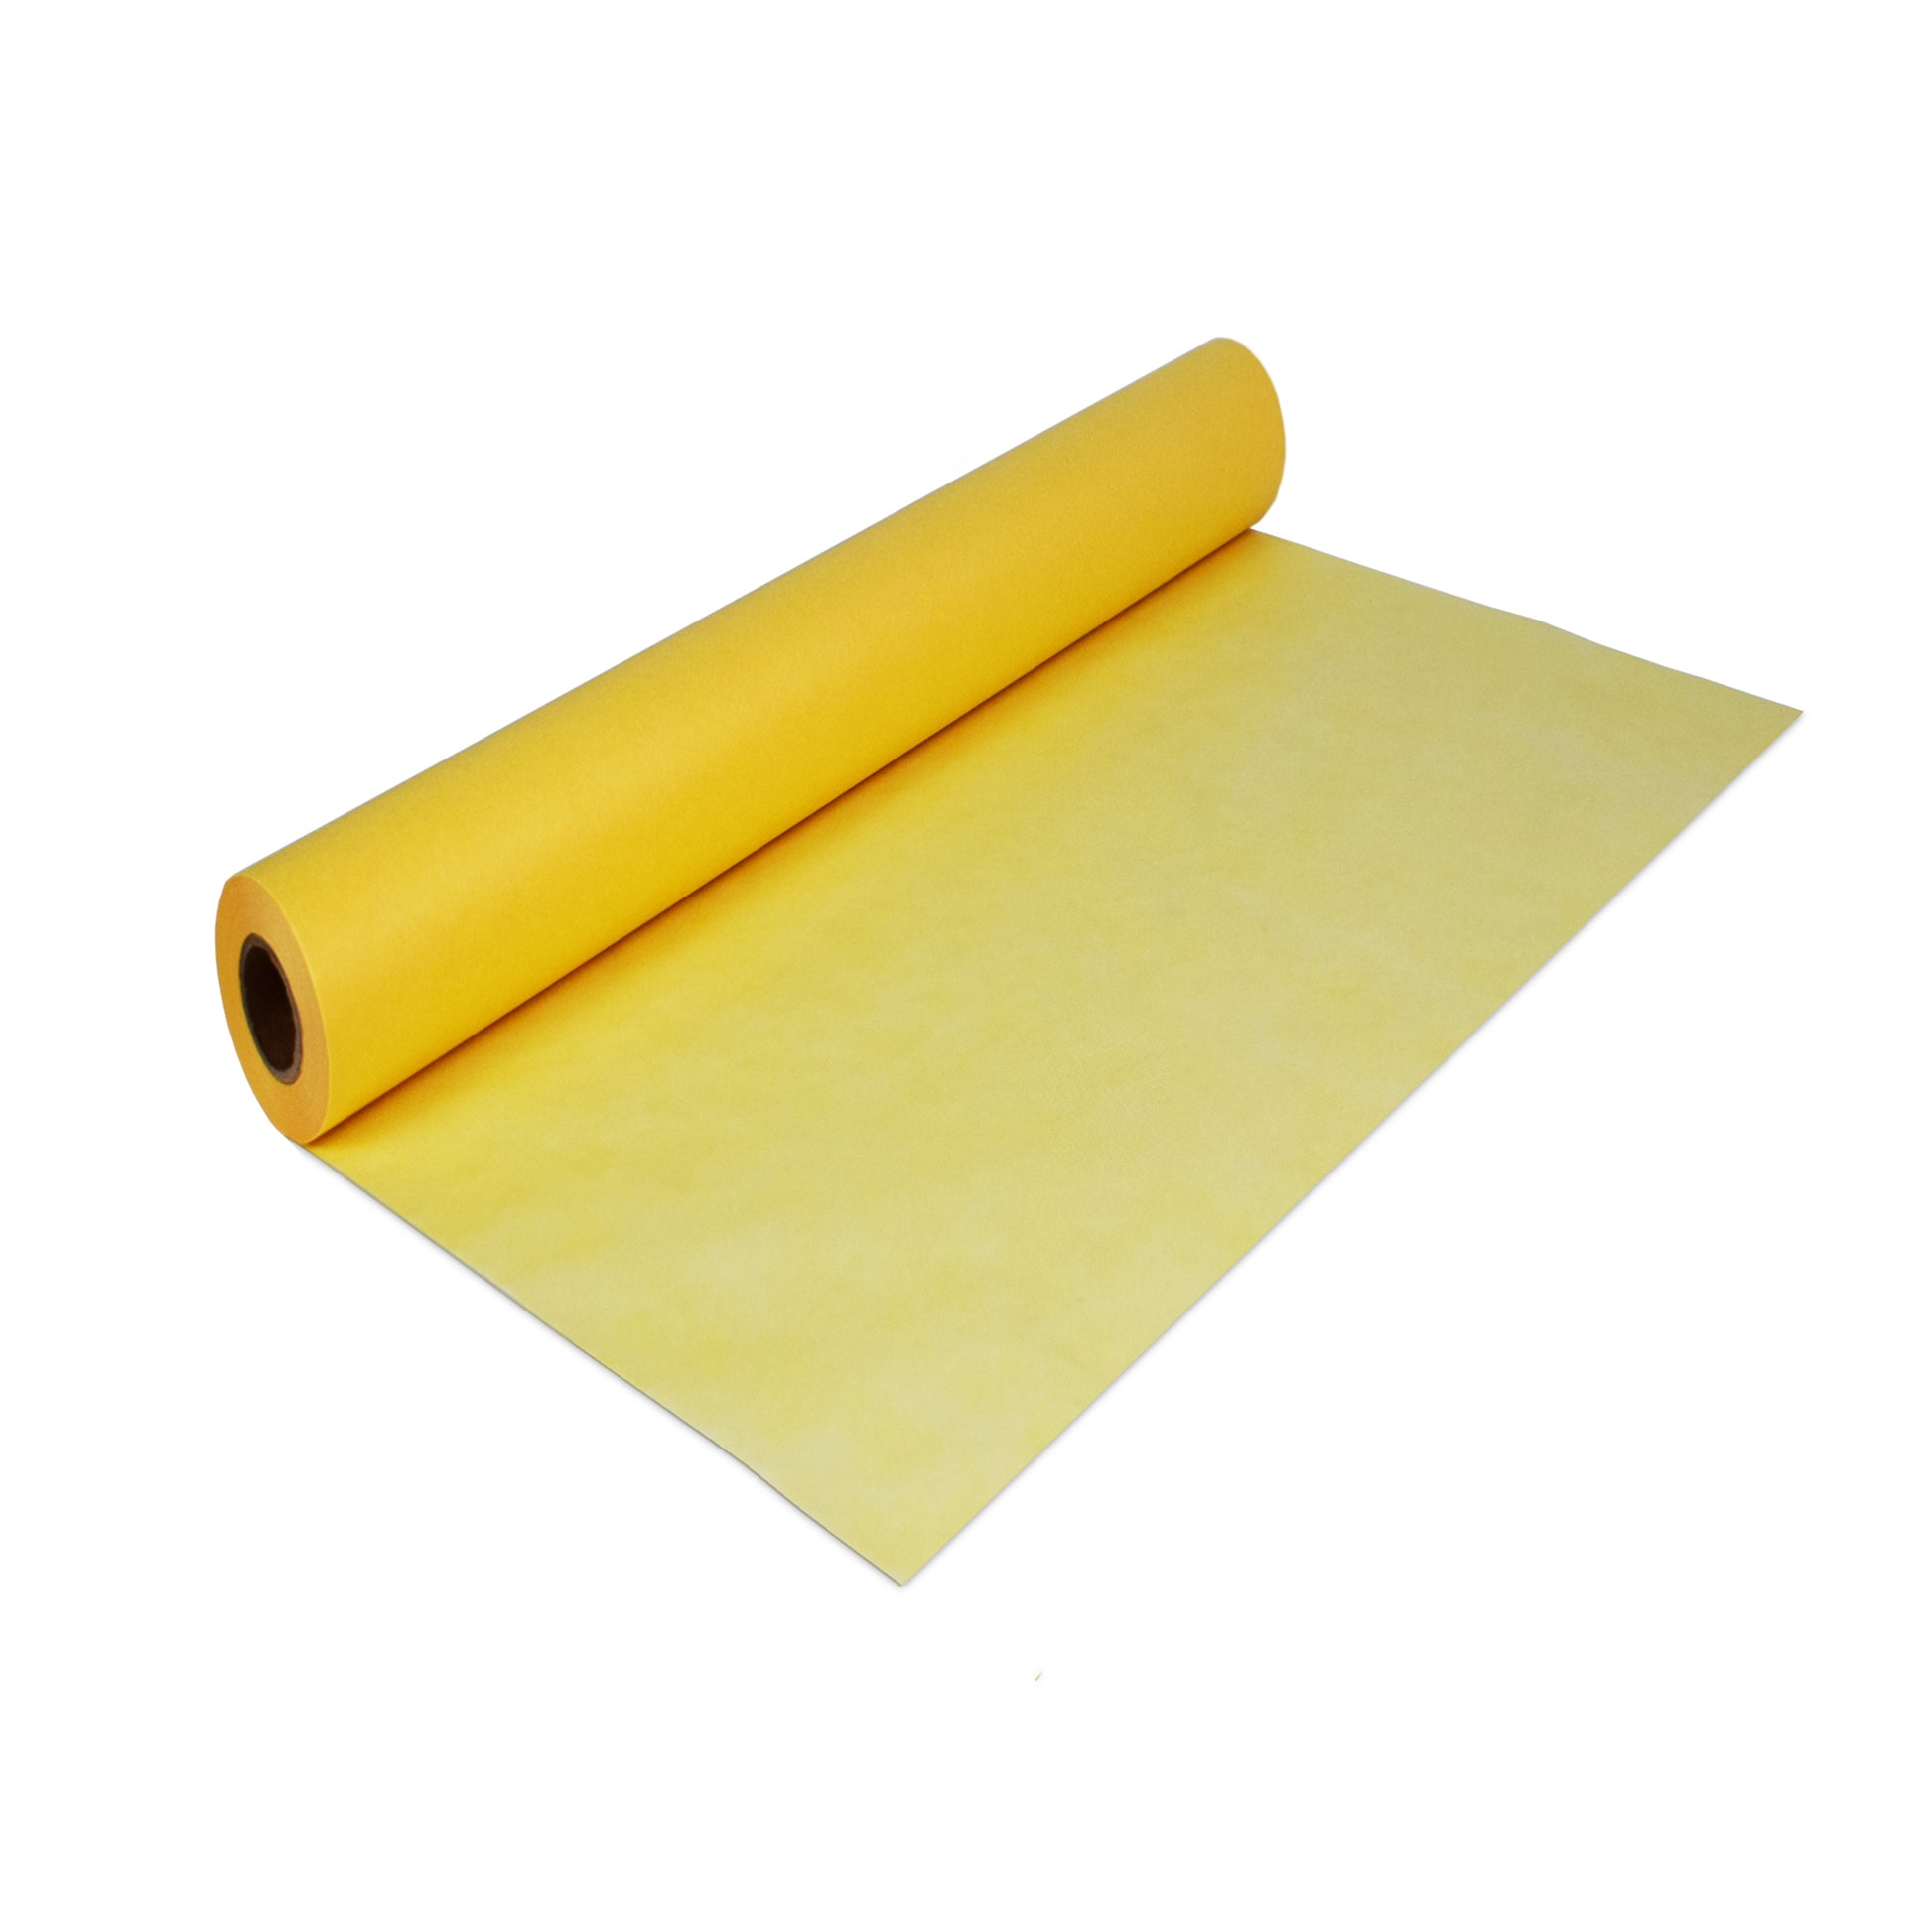 Alvin 55Y-I Lightweight Yellow Tracing Paper Roll 18 x 50yd